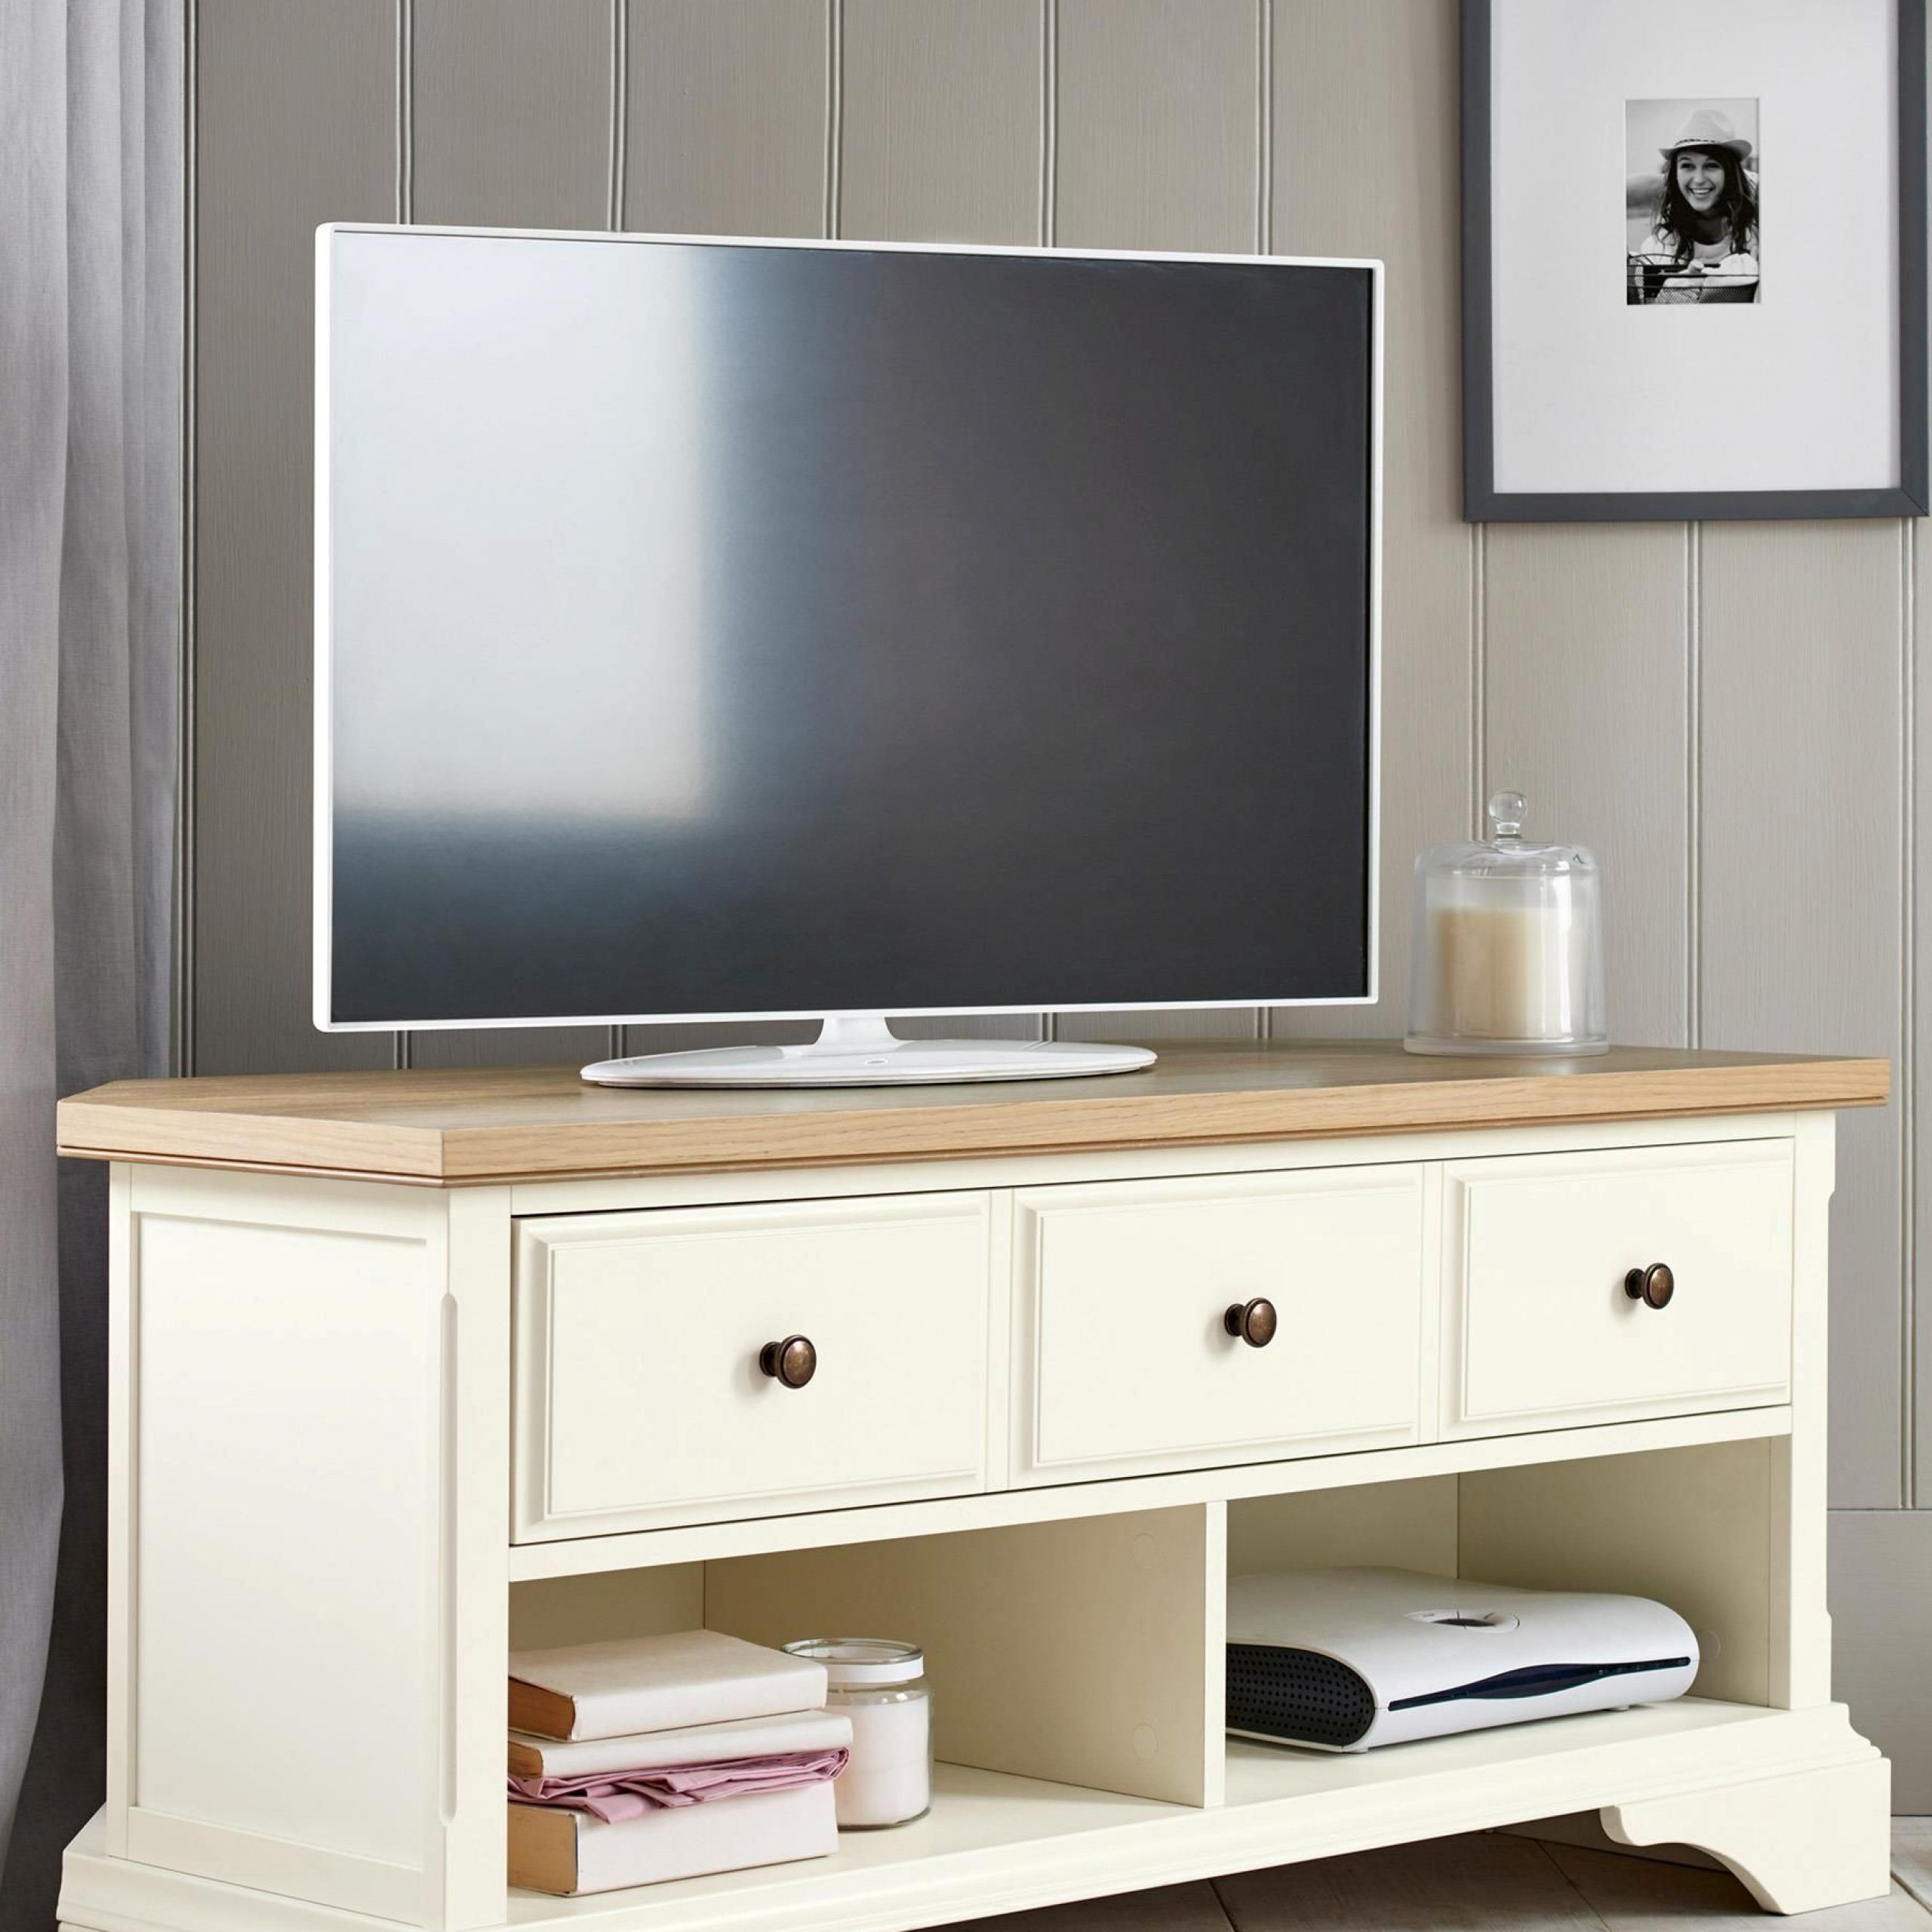 Buy Bordeaux Corner Tv Unit From The Next Uk Online Shop With Cotswold Cream Tv Stands (Gallery 12 of 20)